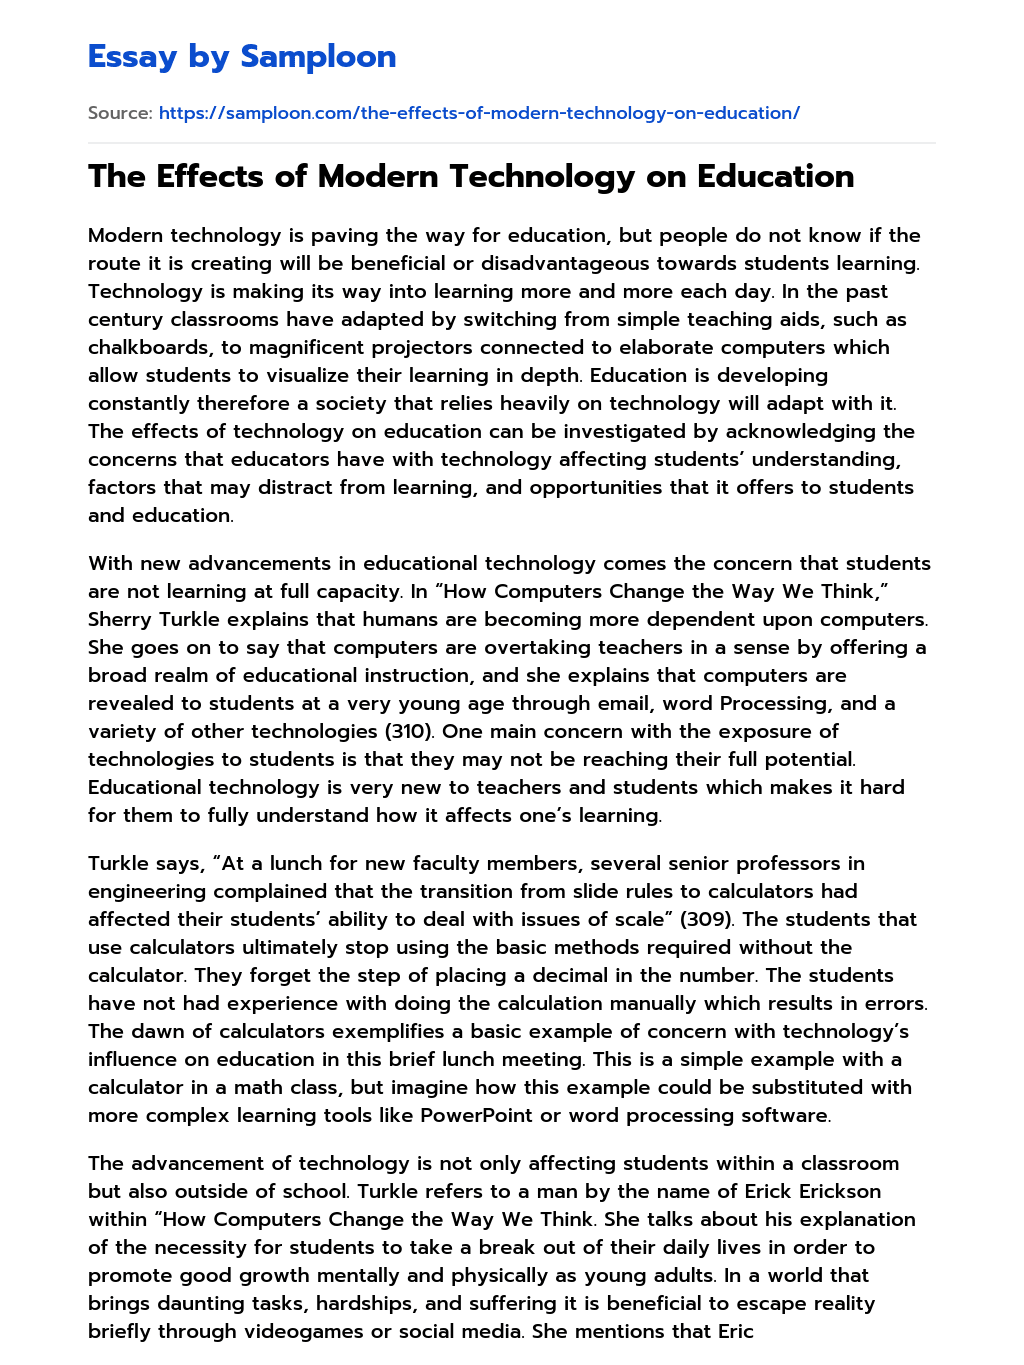 The Effects of Modern Technology on Education essay